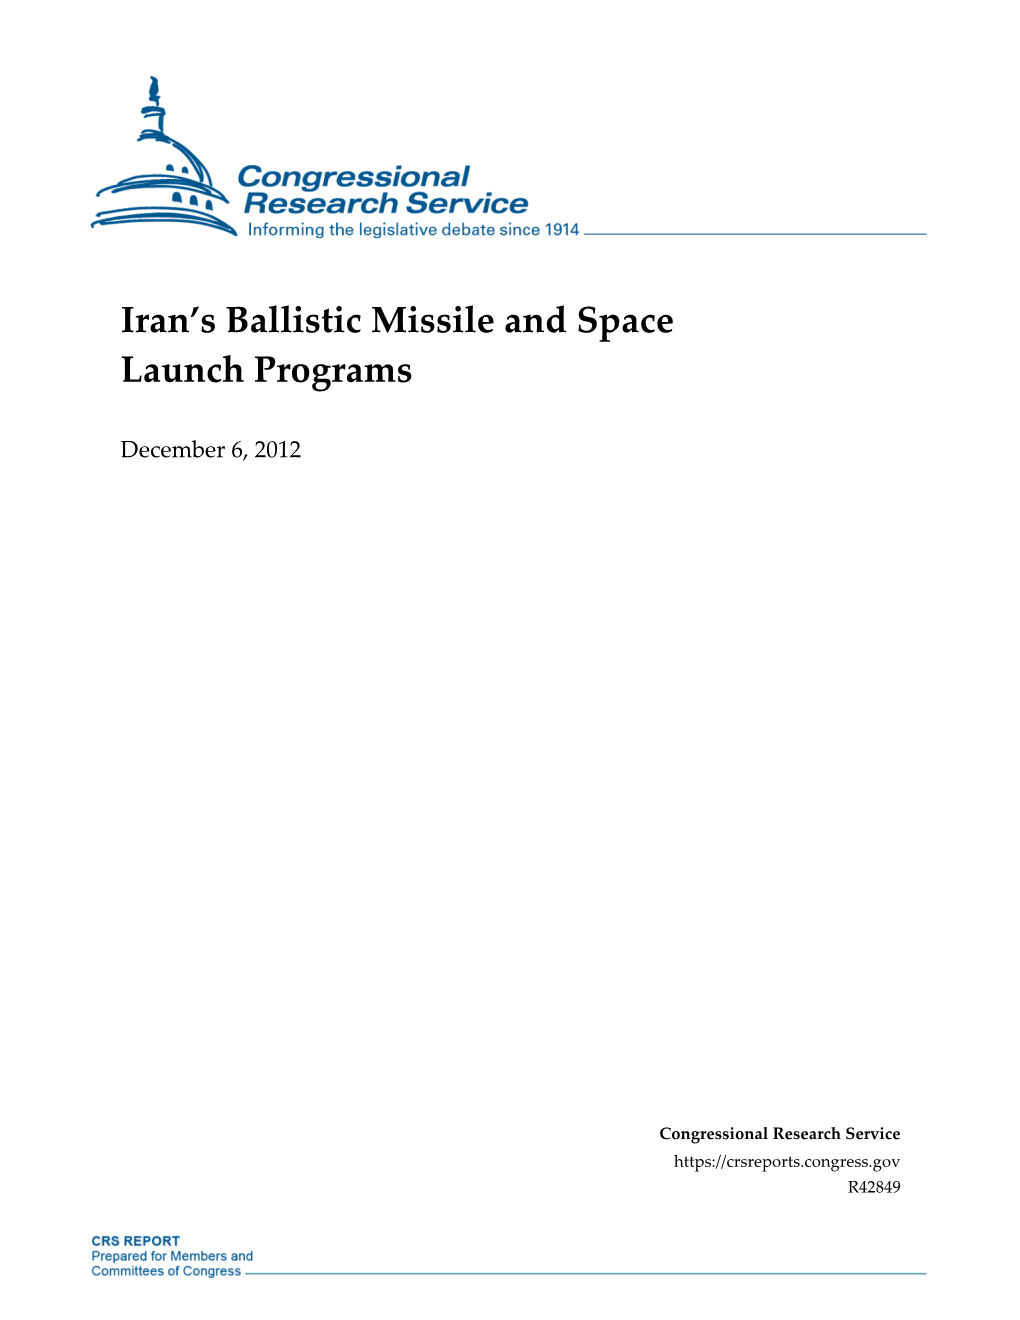 Iran's Ballistic Missile and Space Launch Programs